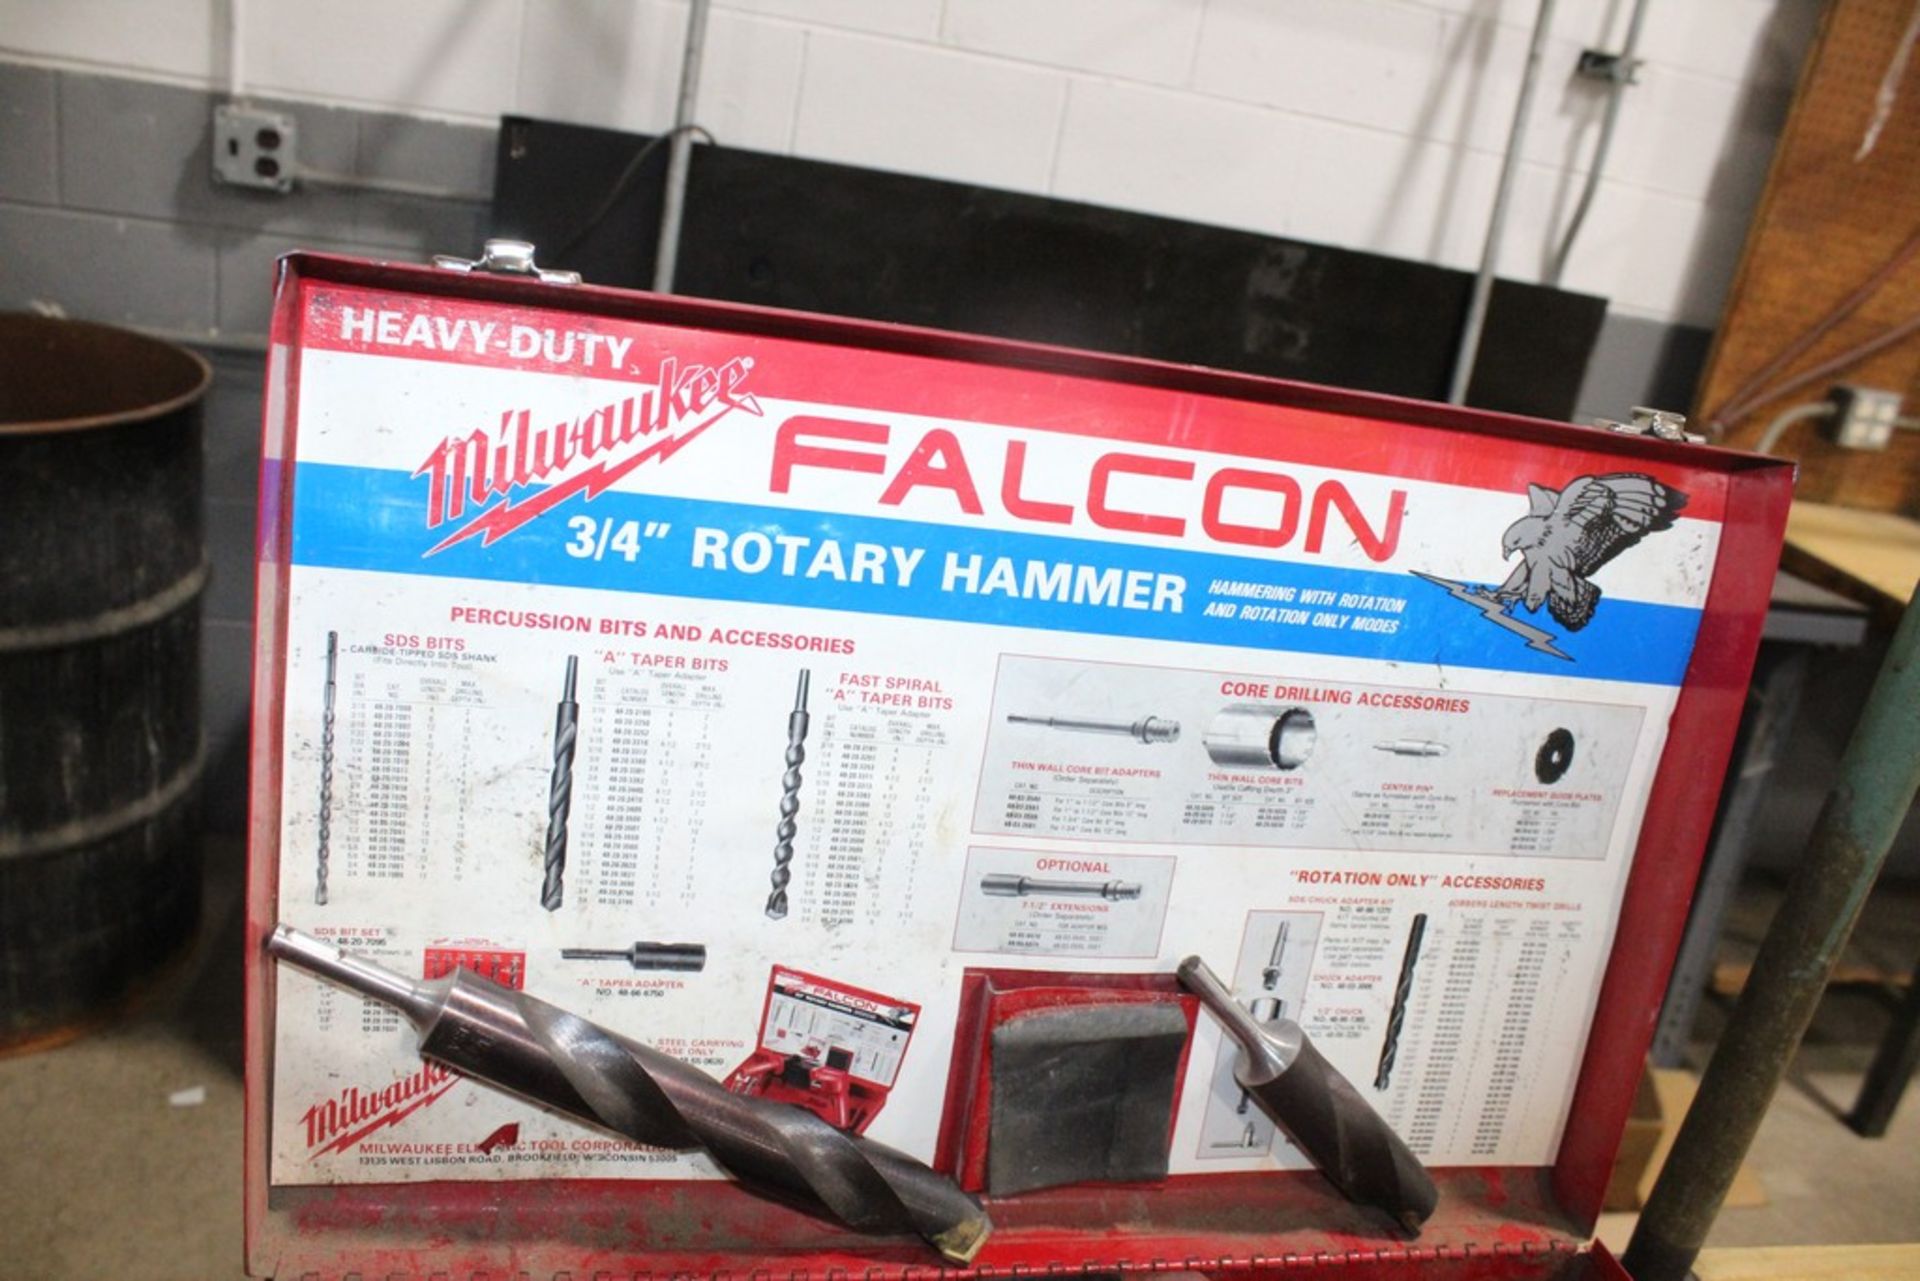 MILWAUKEE FALCON 3/4" ROTARY HAMMER WITH BITS - Image 2 of 3